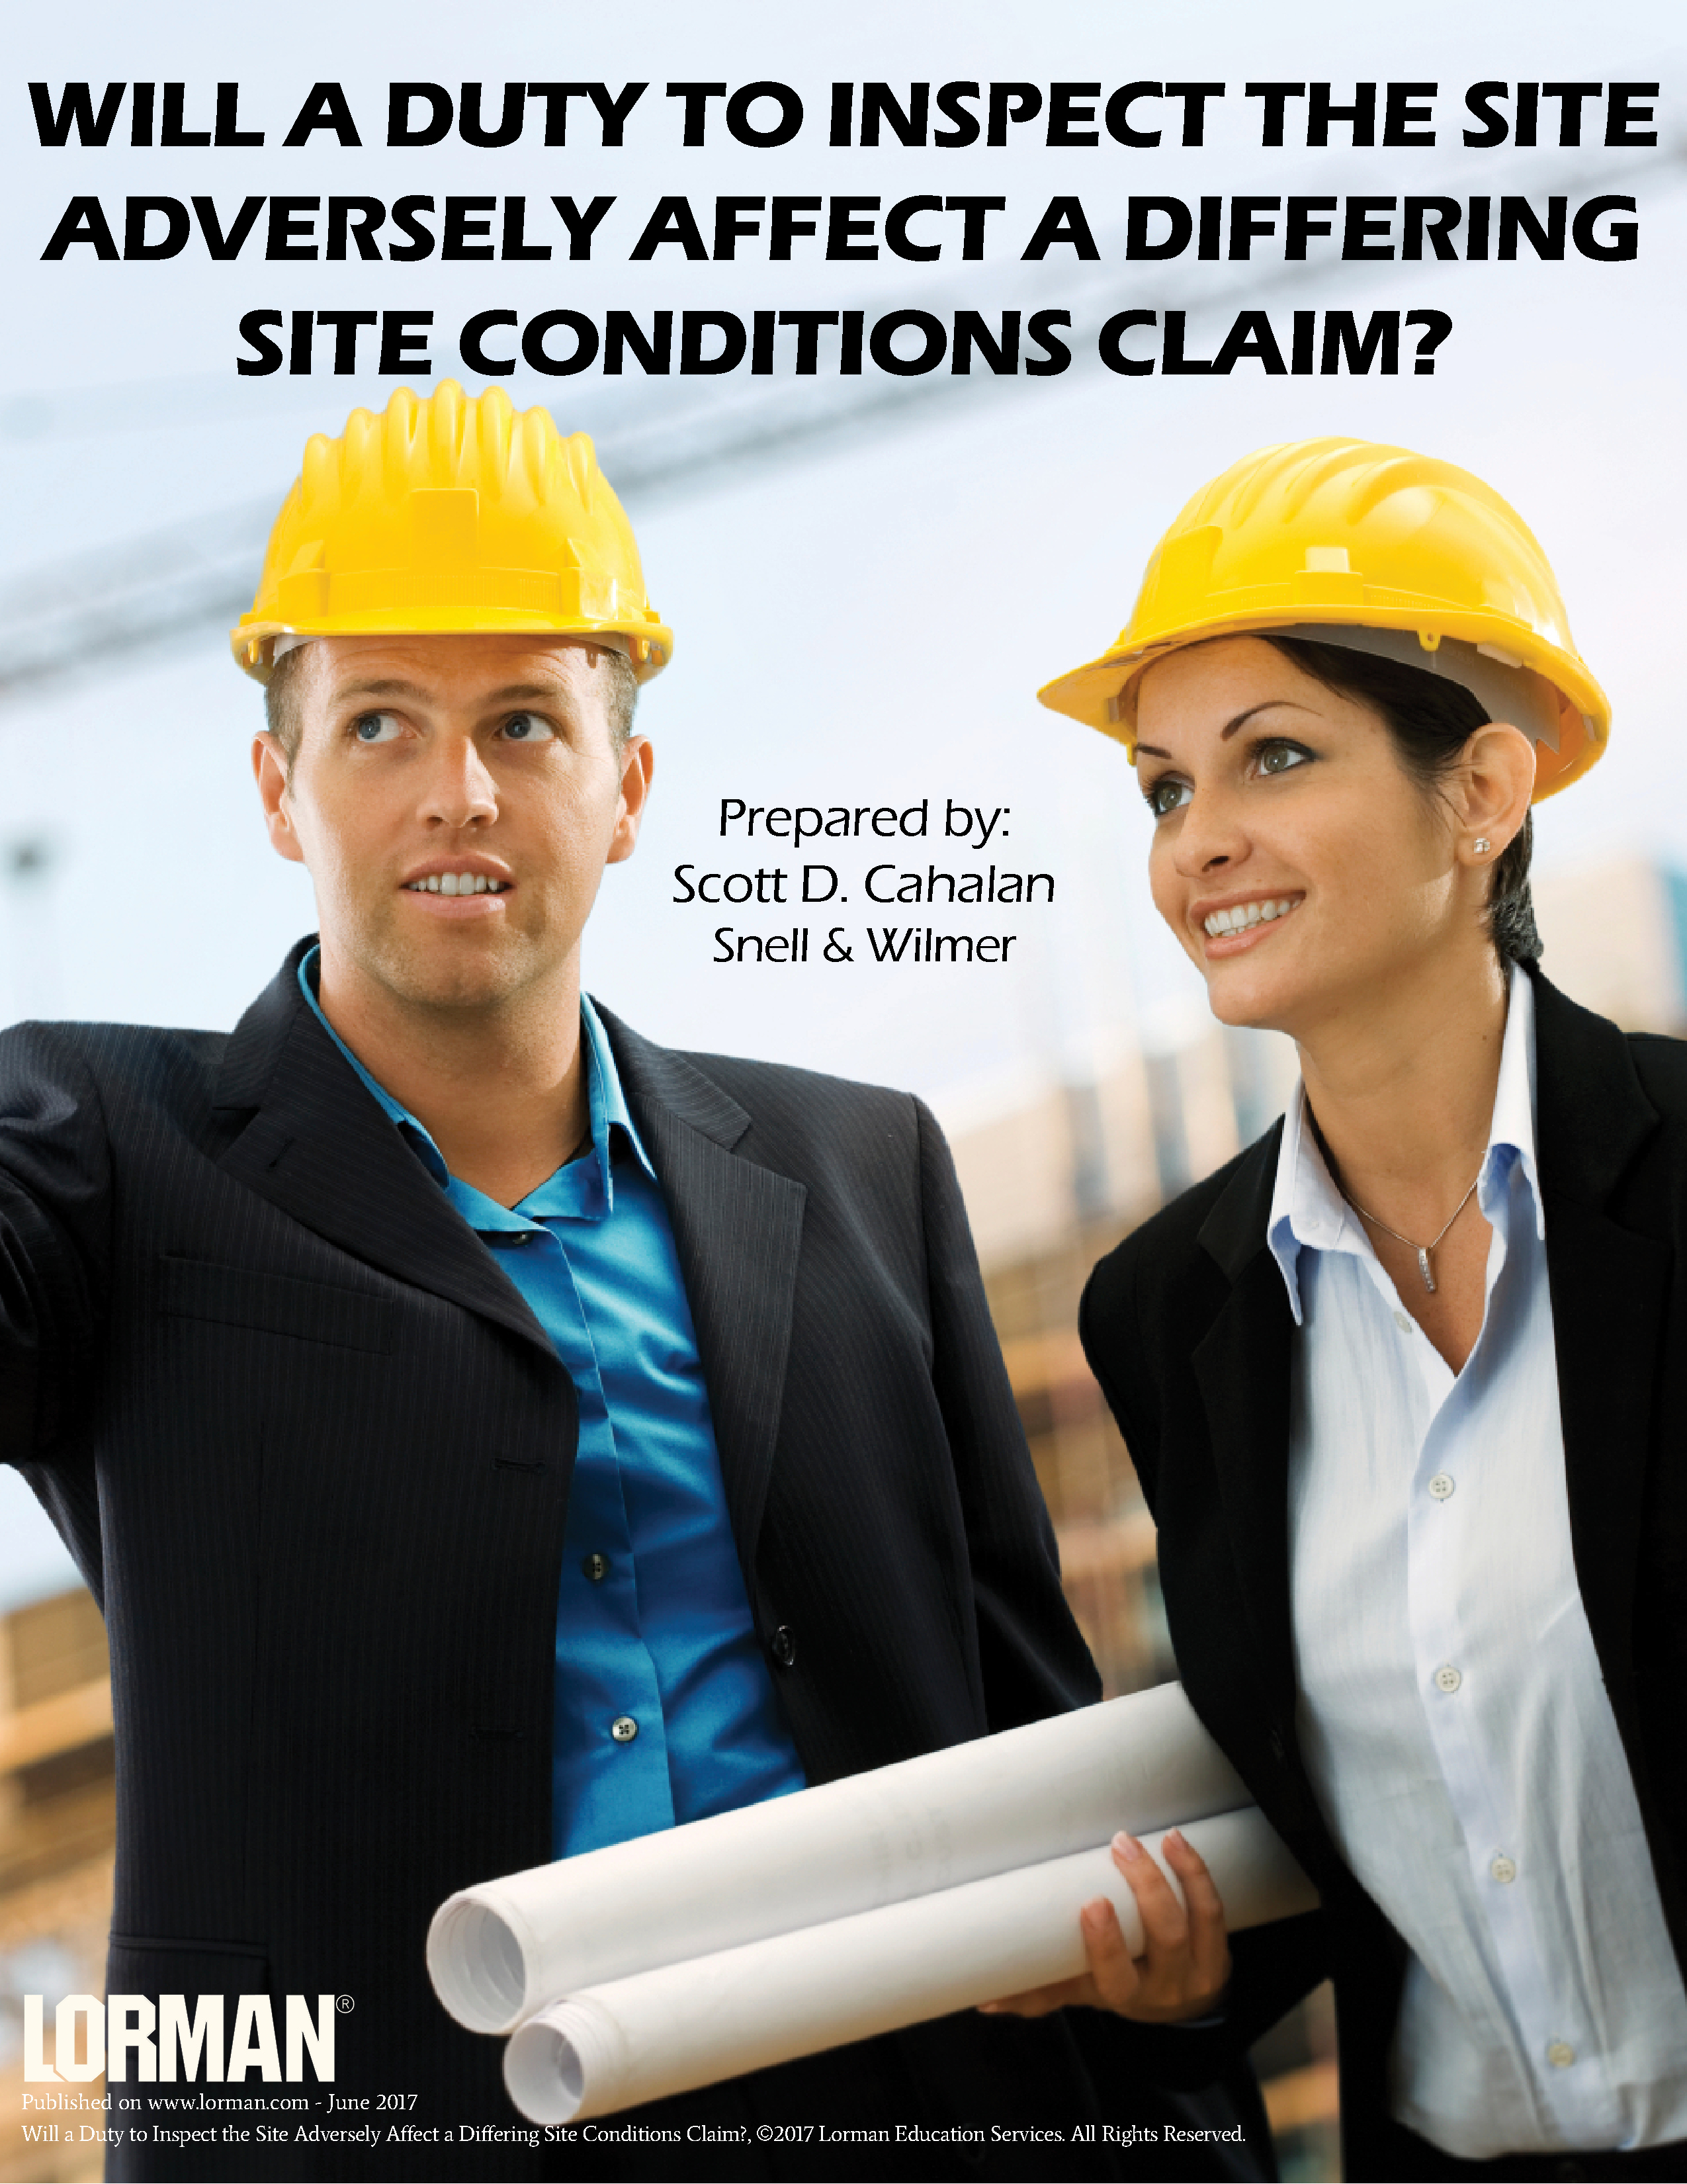 Will a Duty to Inspect the Site Adversely Affect a Differing Site Conditions Claim?